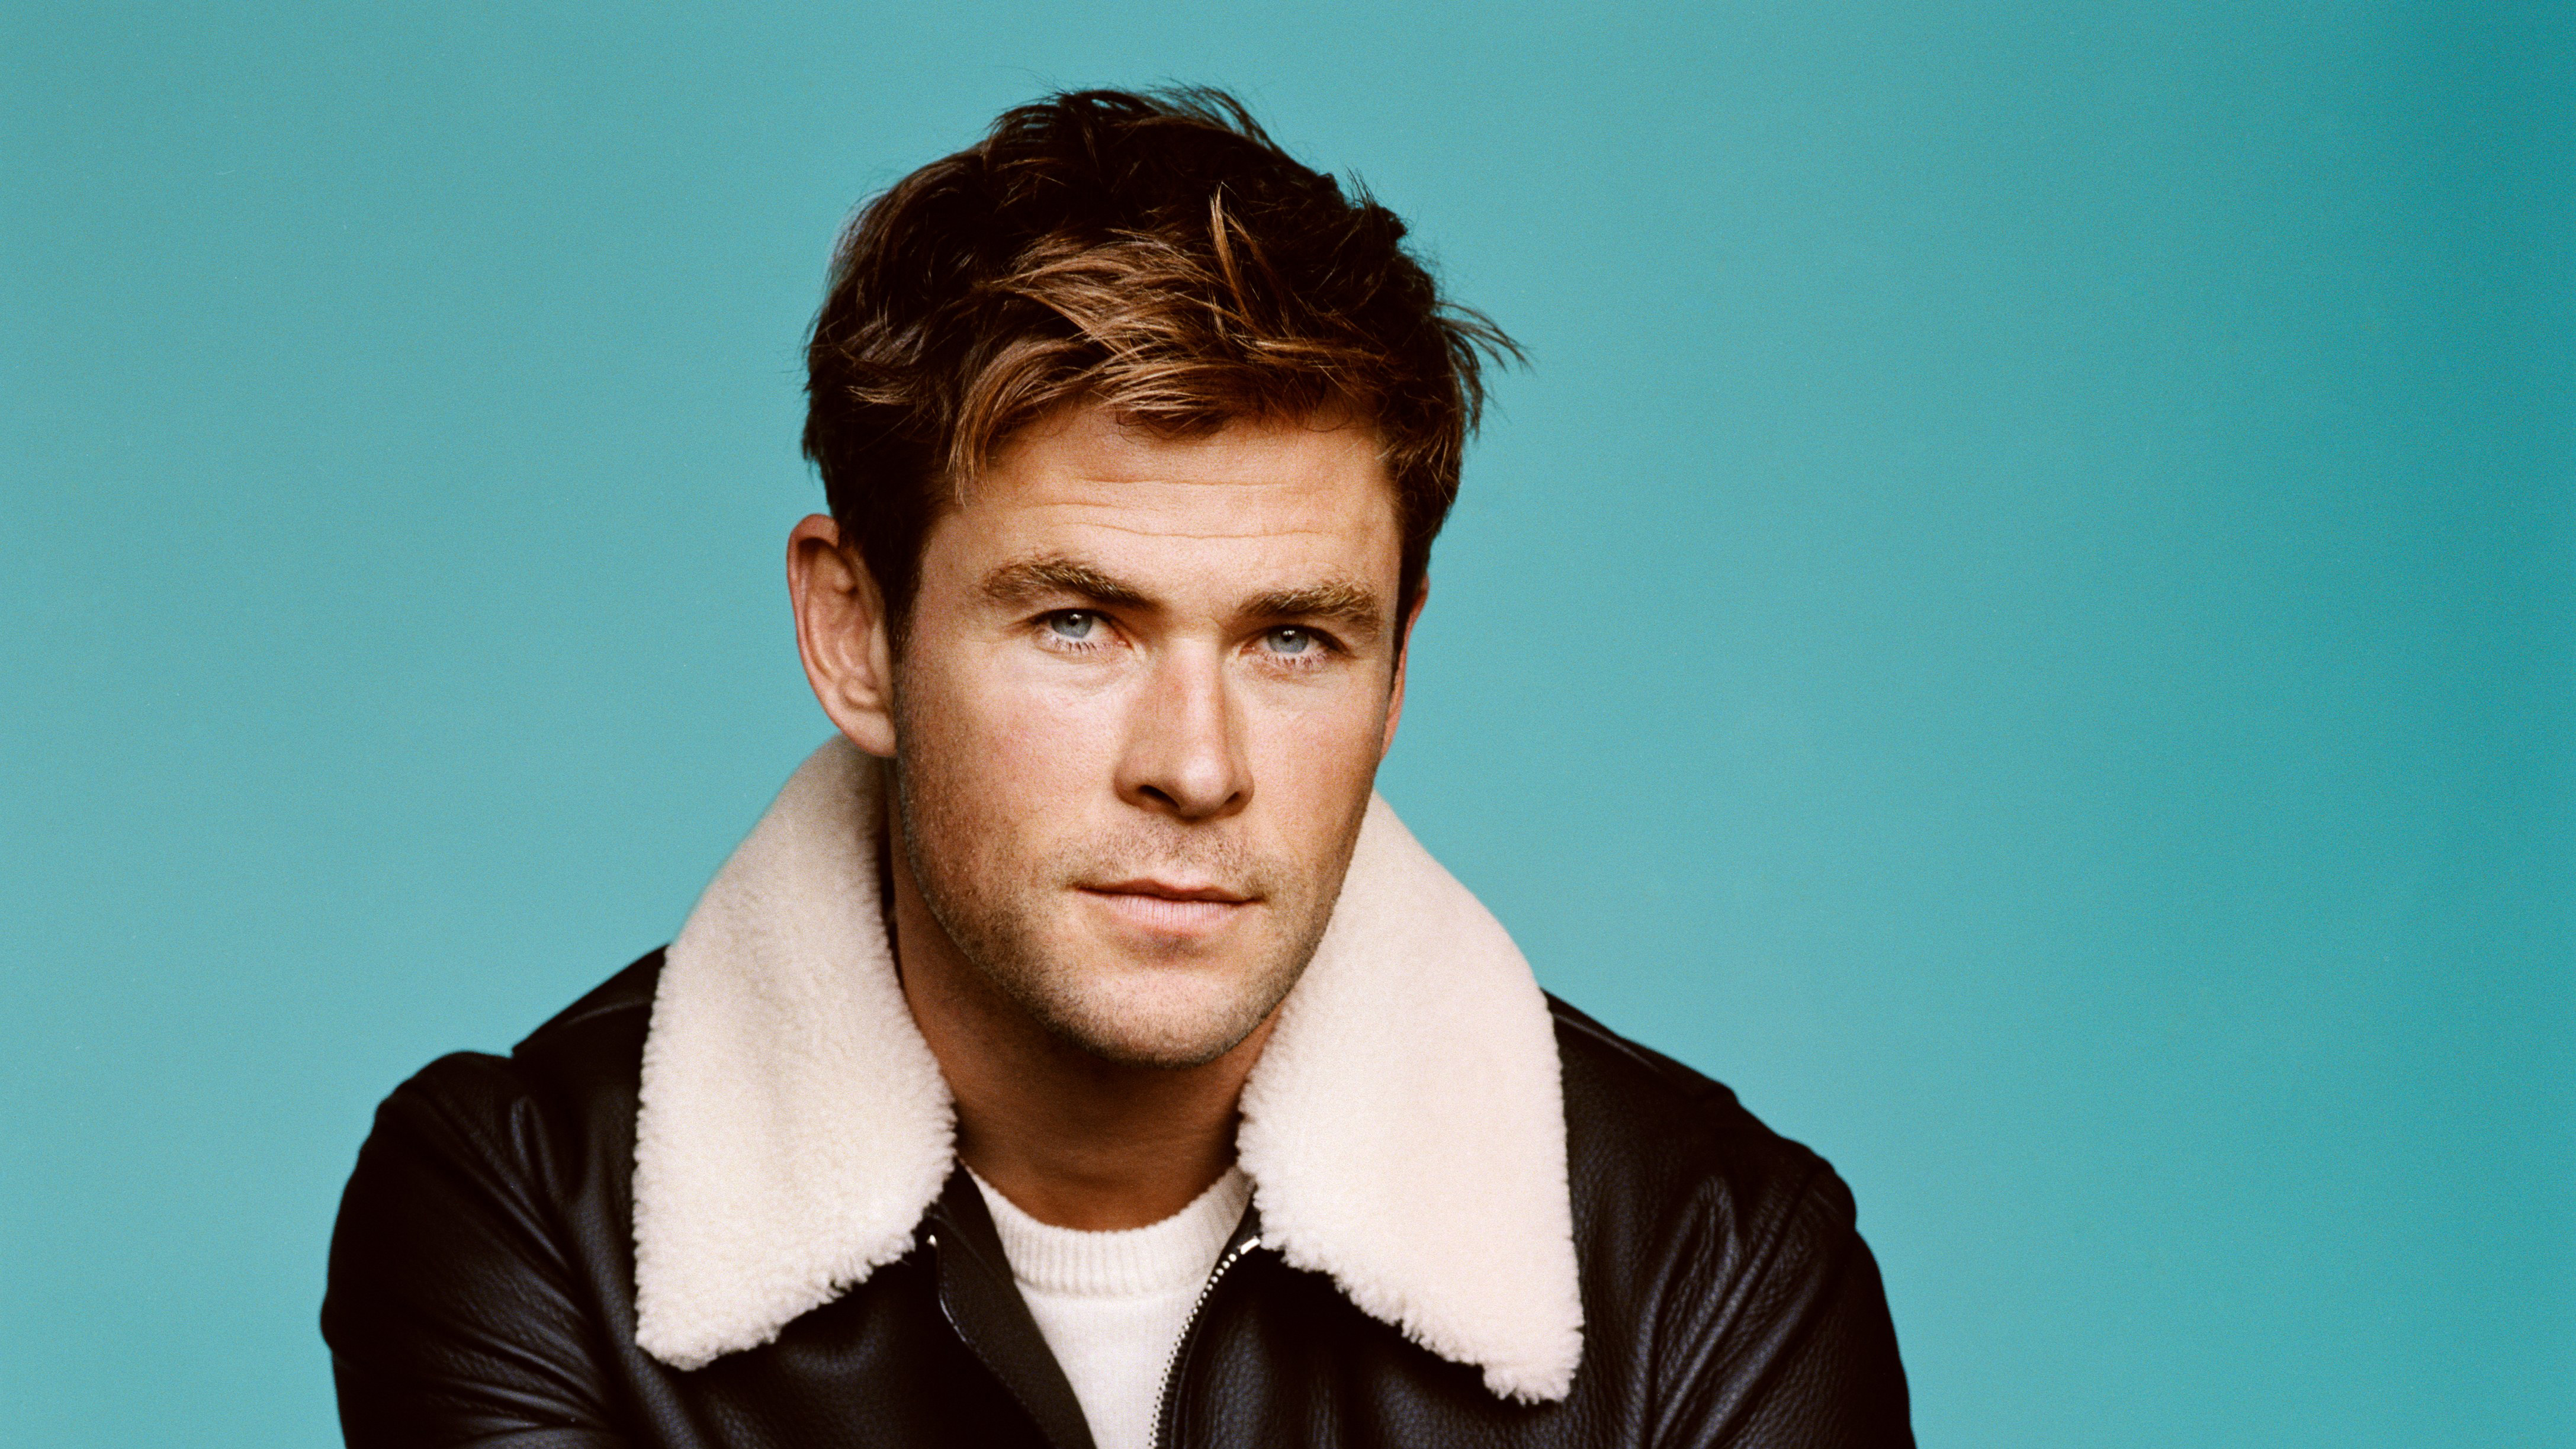 Chris Hemsworth GQ 2018 4k, HD Celebrities, 4k Wallpapers, Images,  Backgrounds, Photos and Pictures